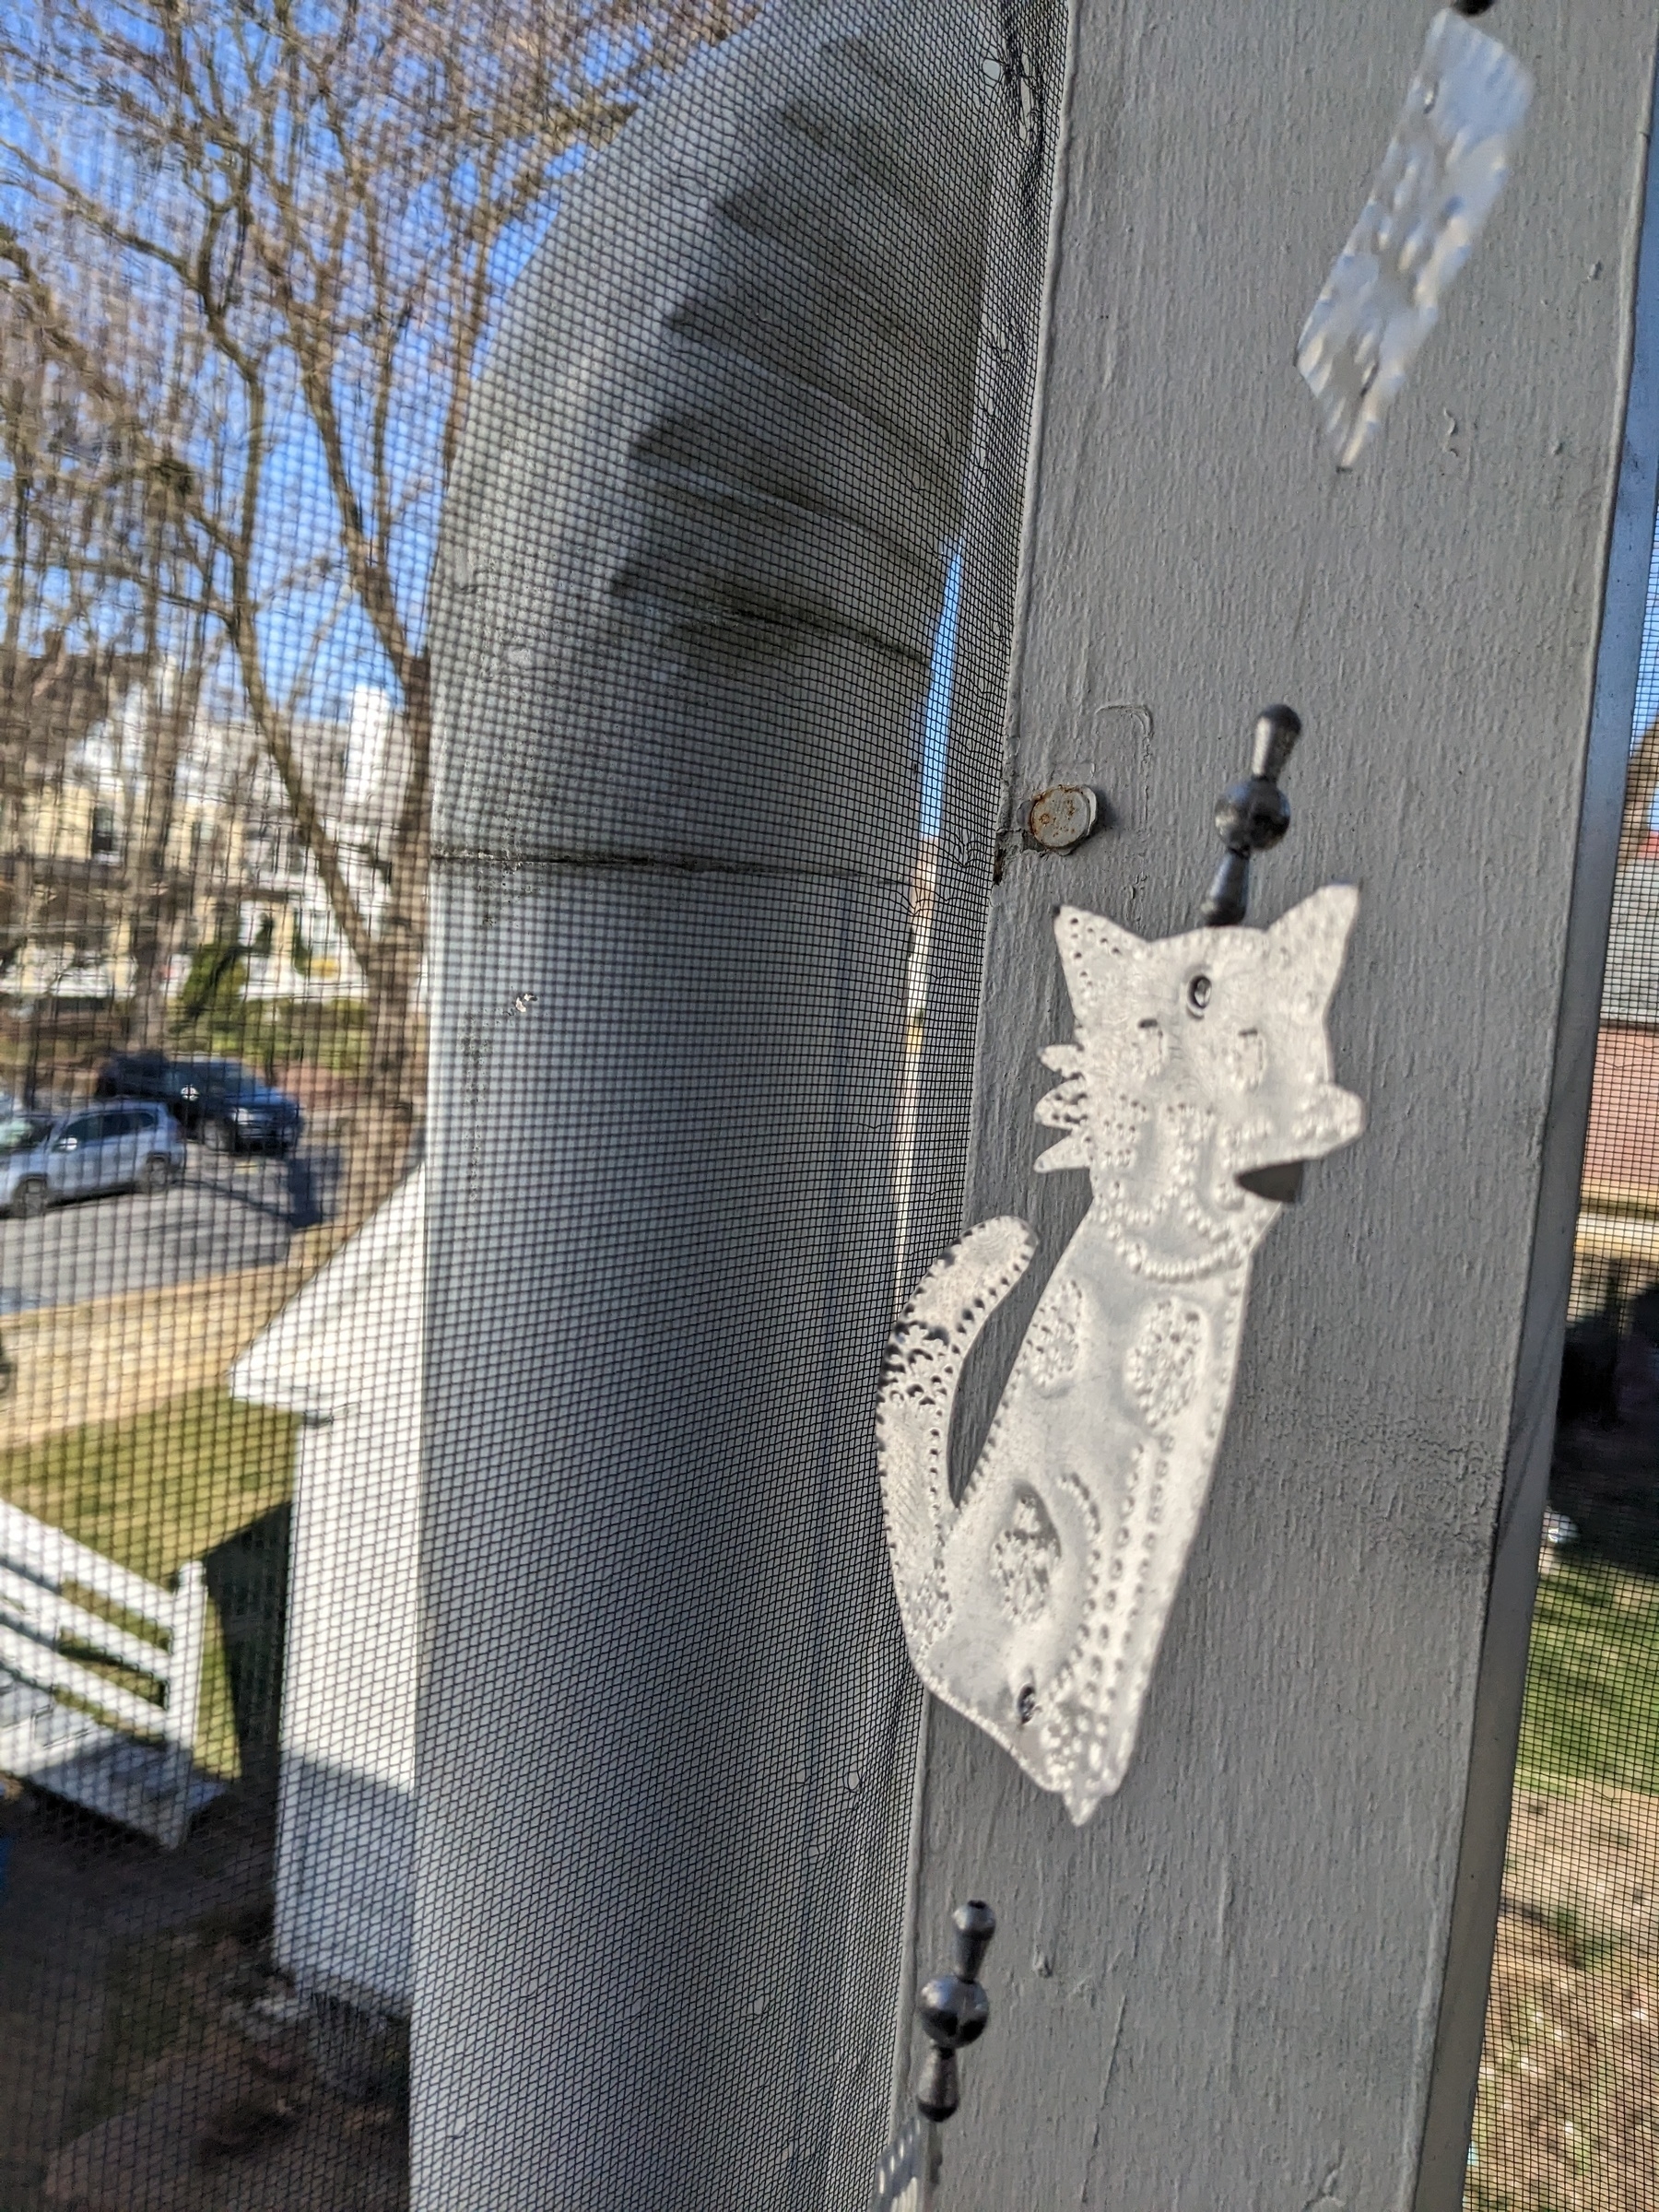 foil decorative cut-out of a cat on a screened porch